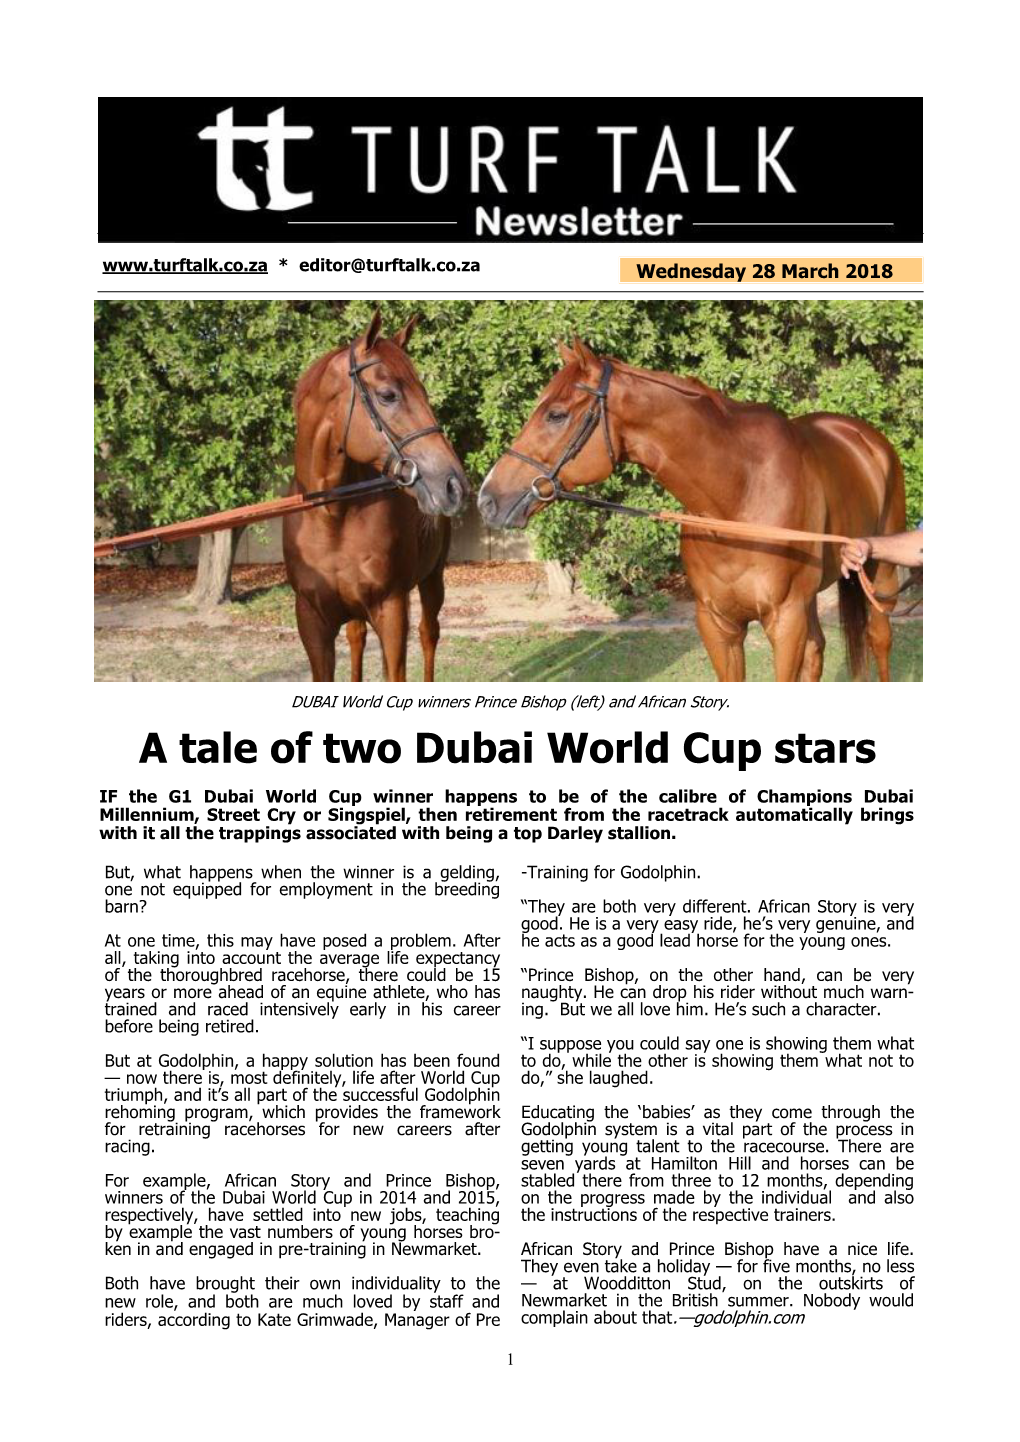 A Tale of Two Dubai World Cup Stars